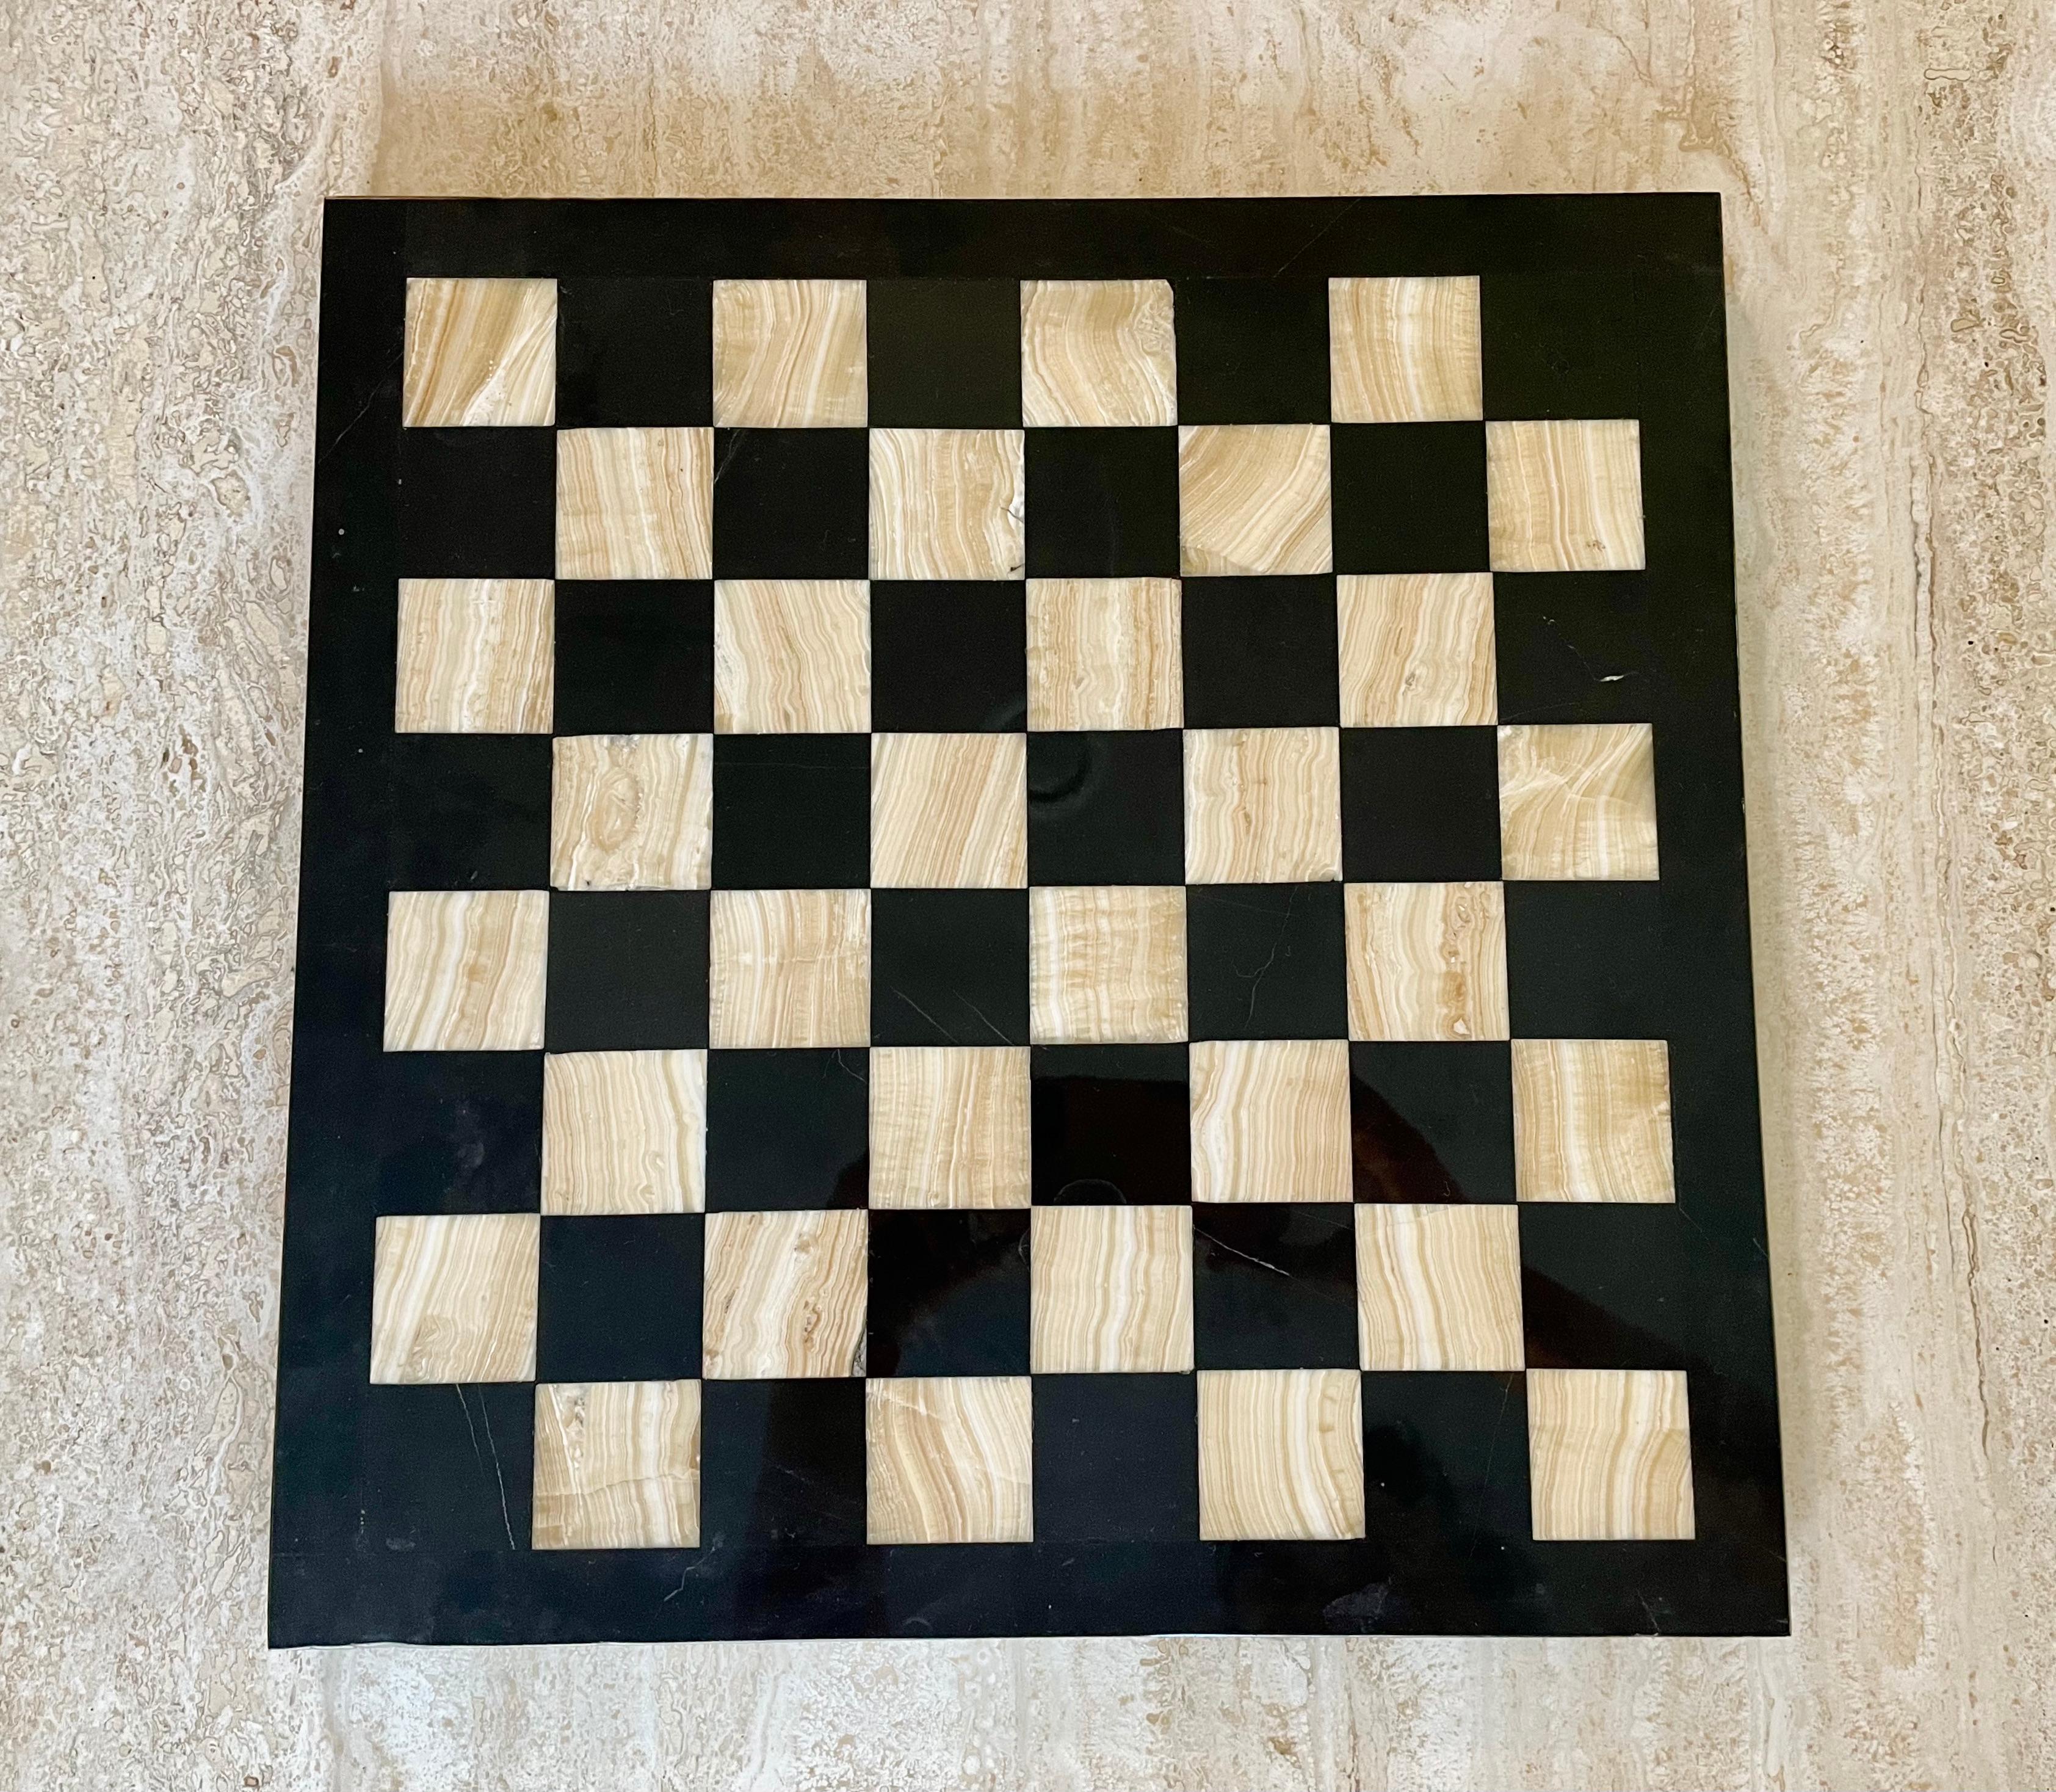 Onyx and marble chess board. Nuetral colored chess board that can be added to any game room. Chess pieces not included.